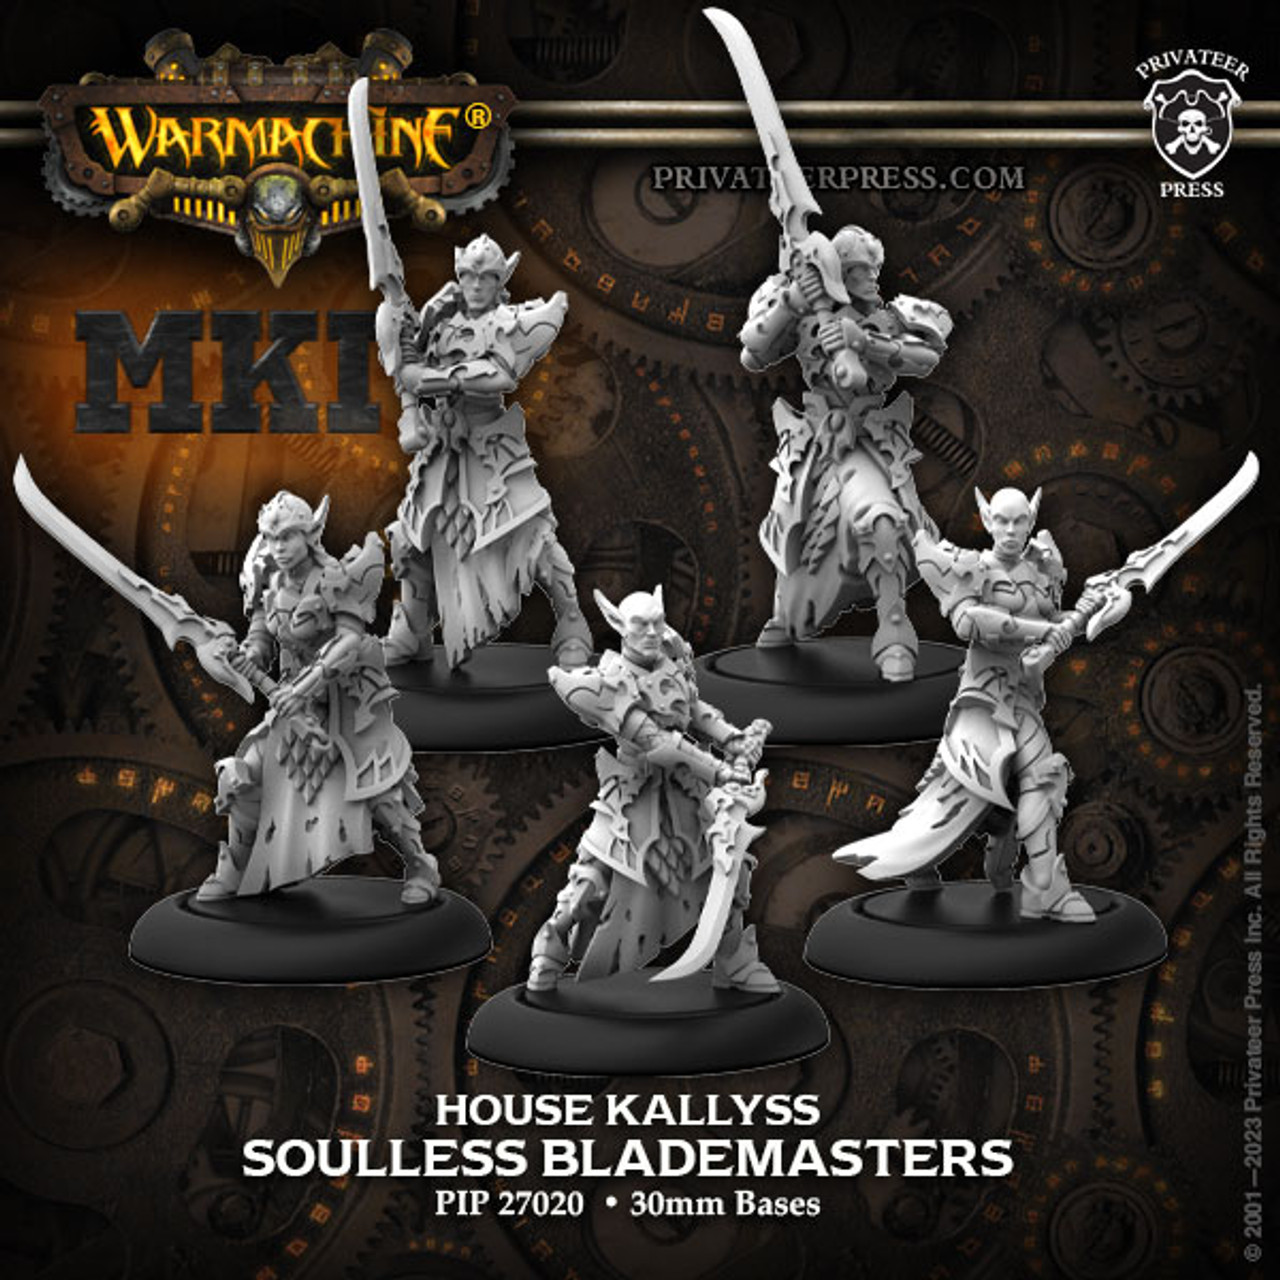 Soulless Blademasters - Warmachine